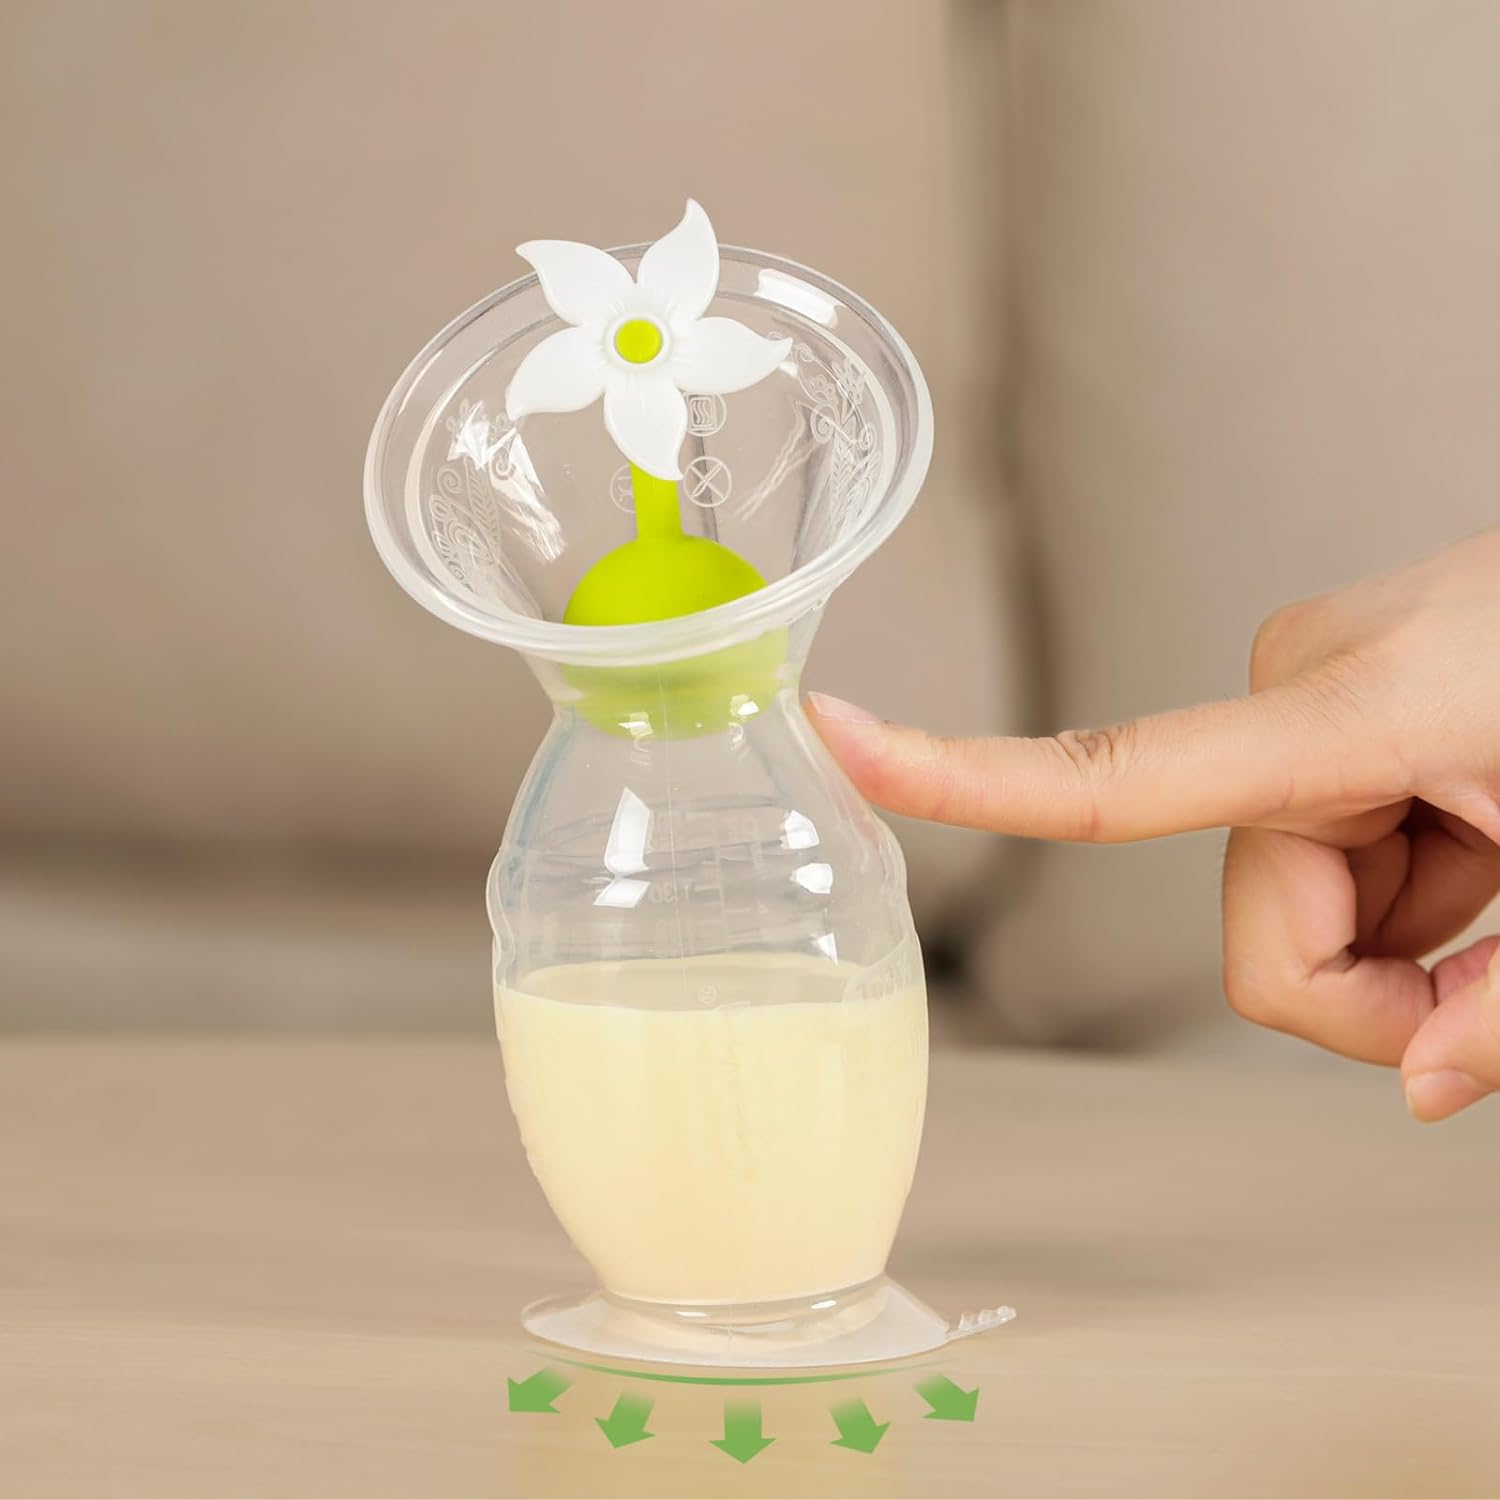 Haakaa Manual Breast Pump Silicone Breast Pump Milk Saver Milk Pump with Suction Base and Flower Stopper 100% Food Grade Silicone BPA Free (5oz/150ml) (White) : Baby